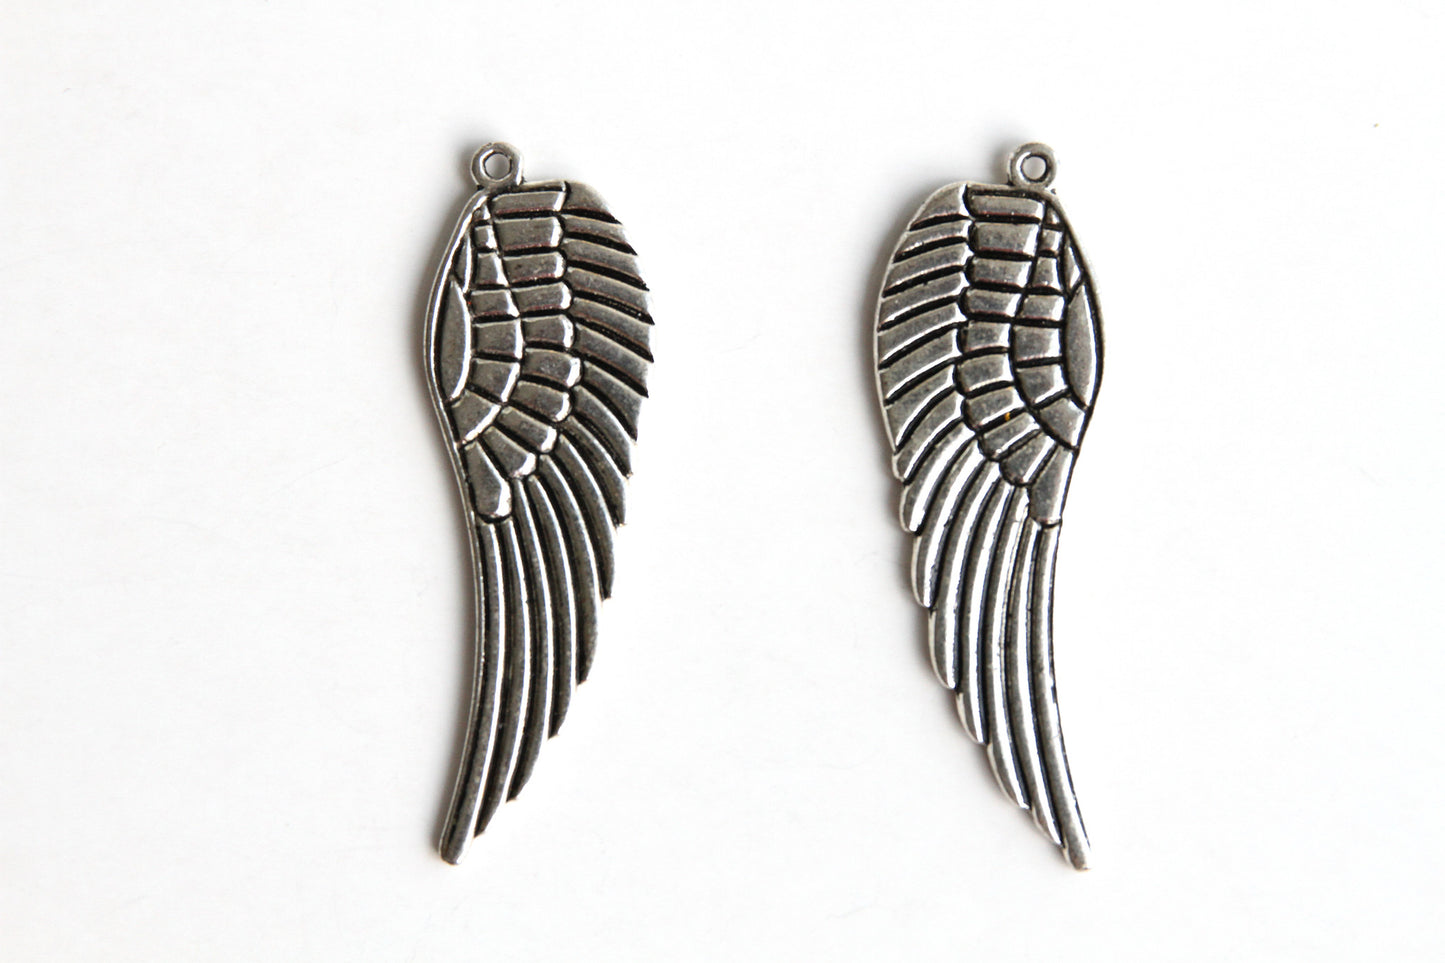 Charm - Feather Wing, Antique Silver - KEY Handmade
 - 2